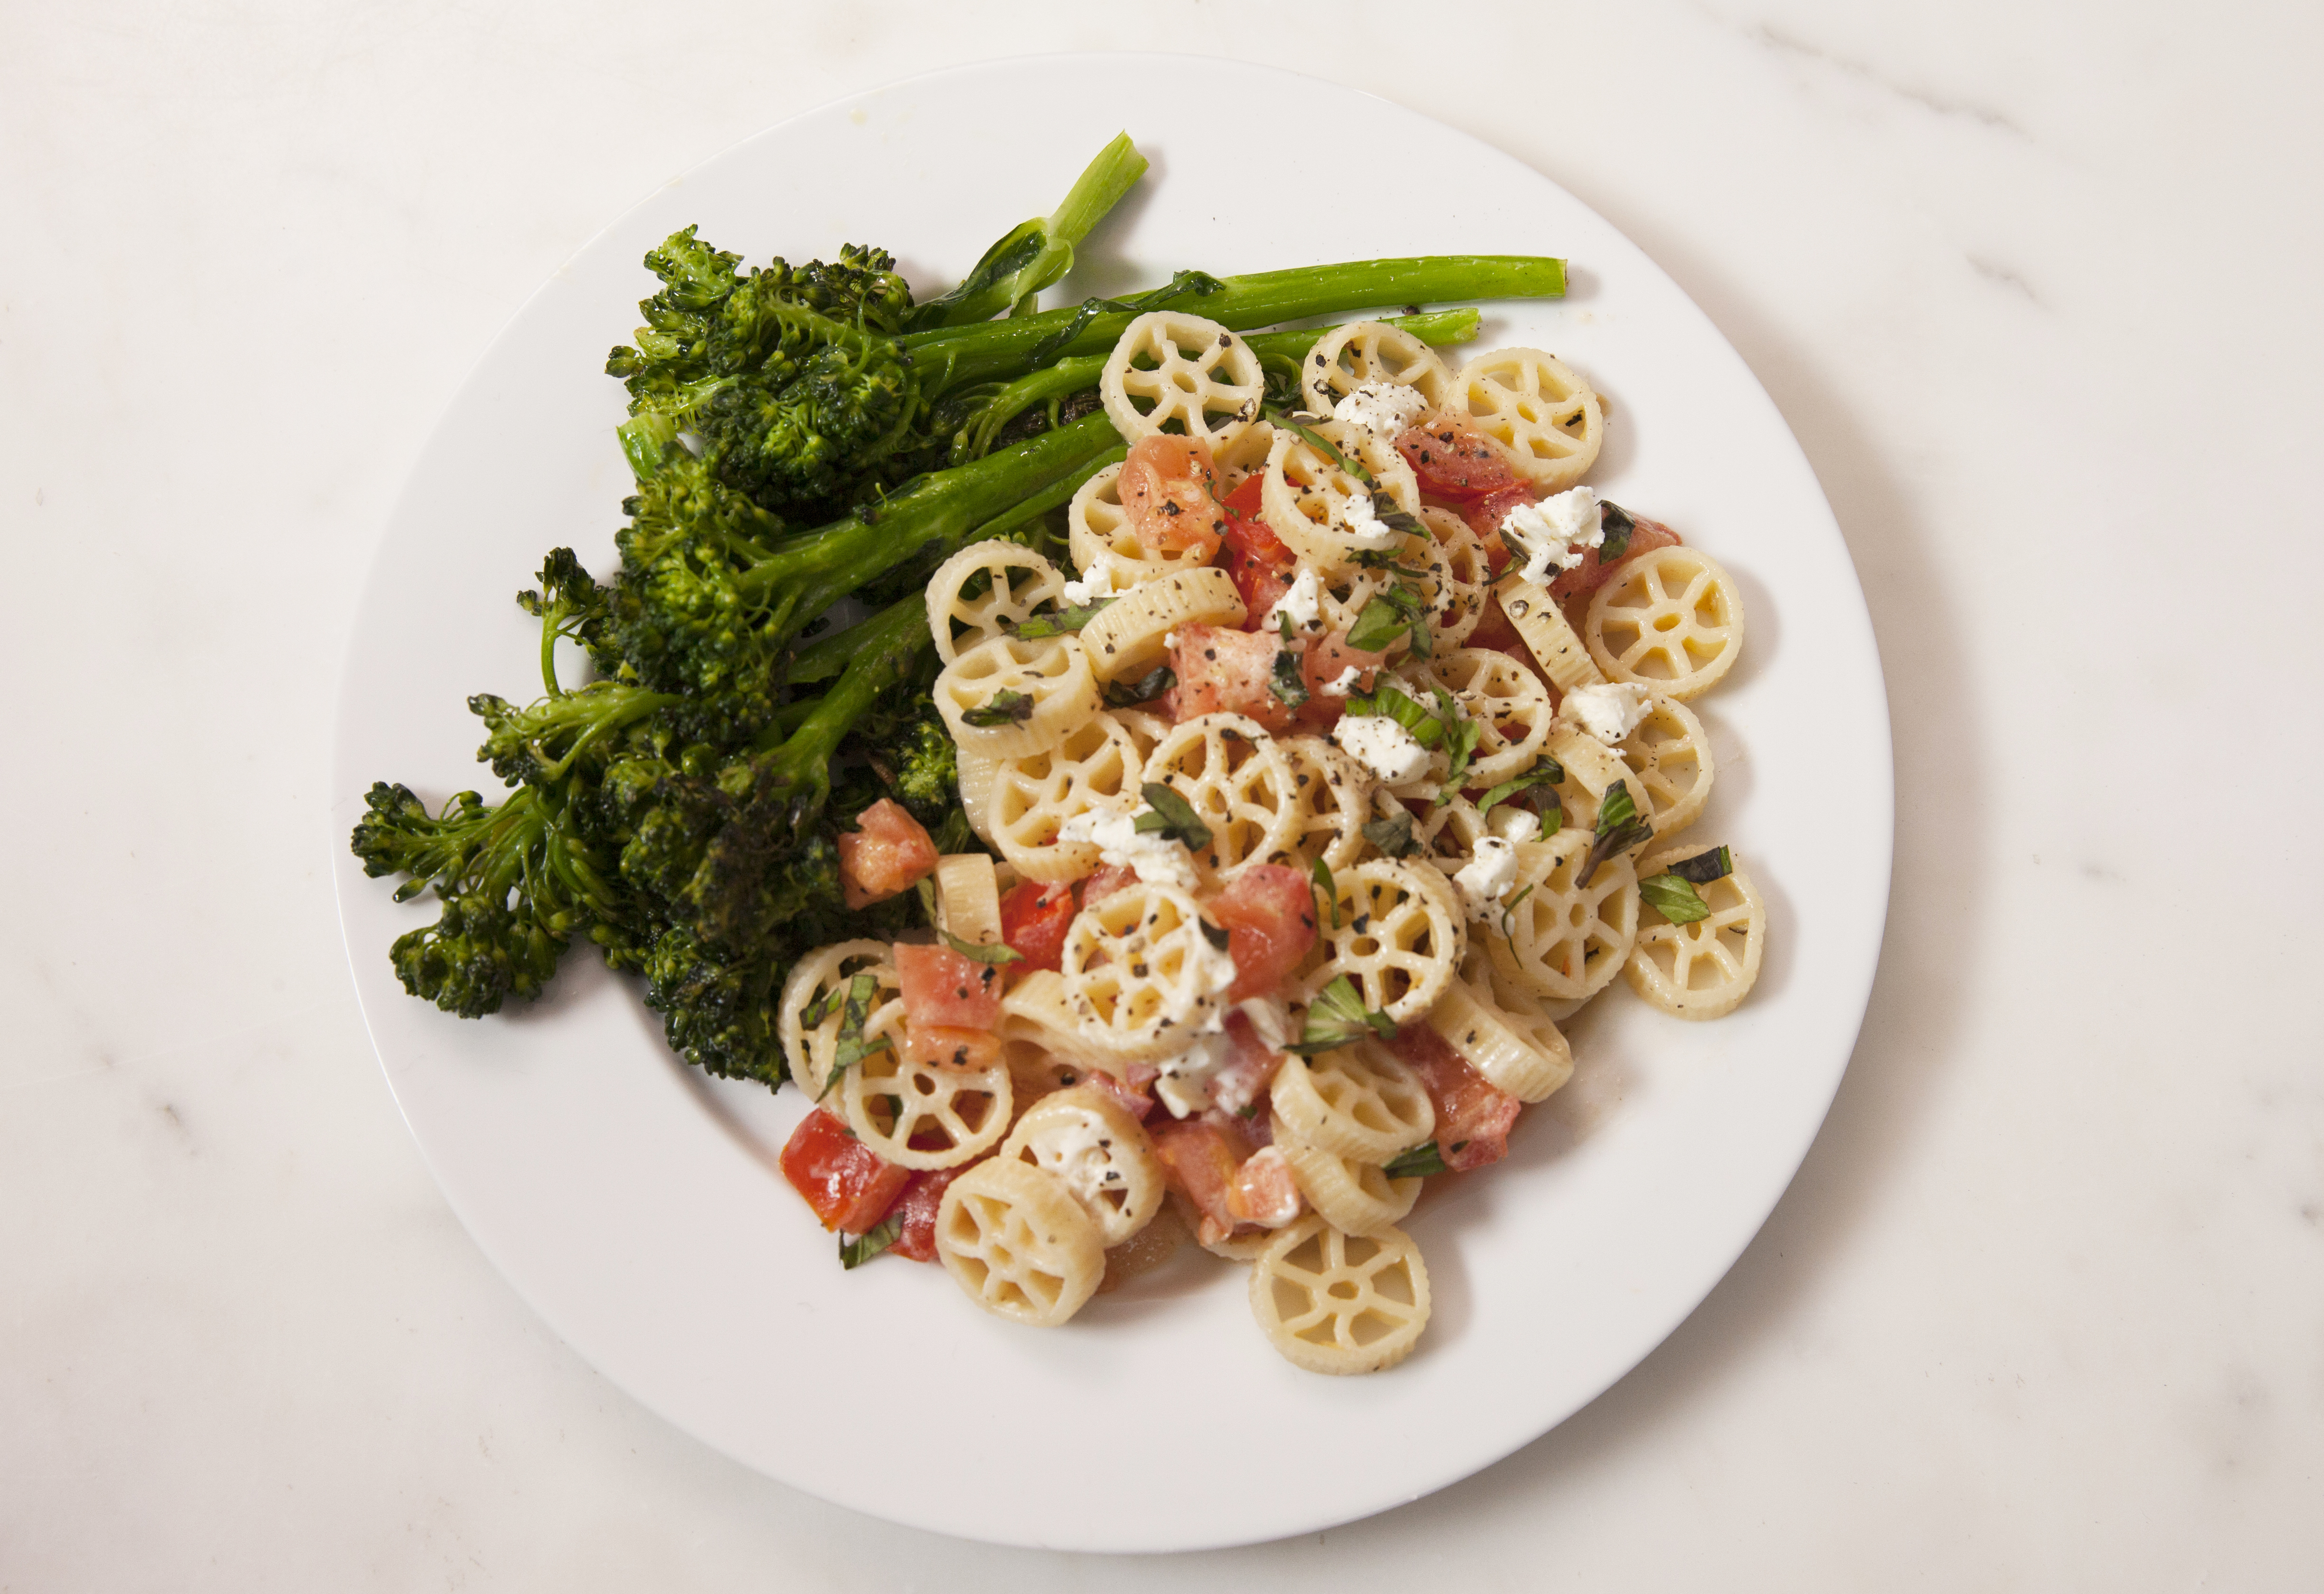 Marley Spoon's Creamy Wagon Wheel Pasta with tomatoes and garlicky broccolini.